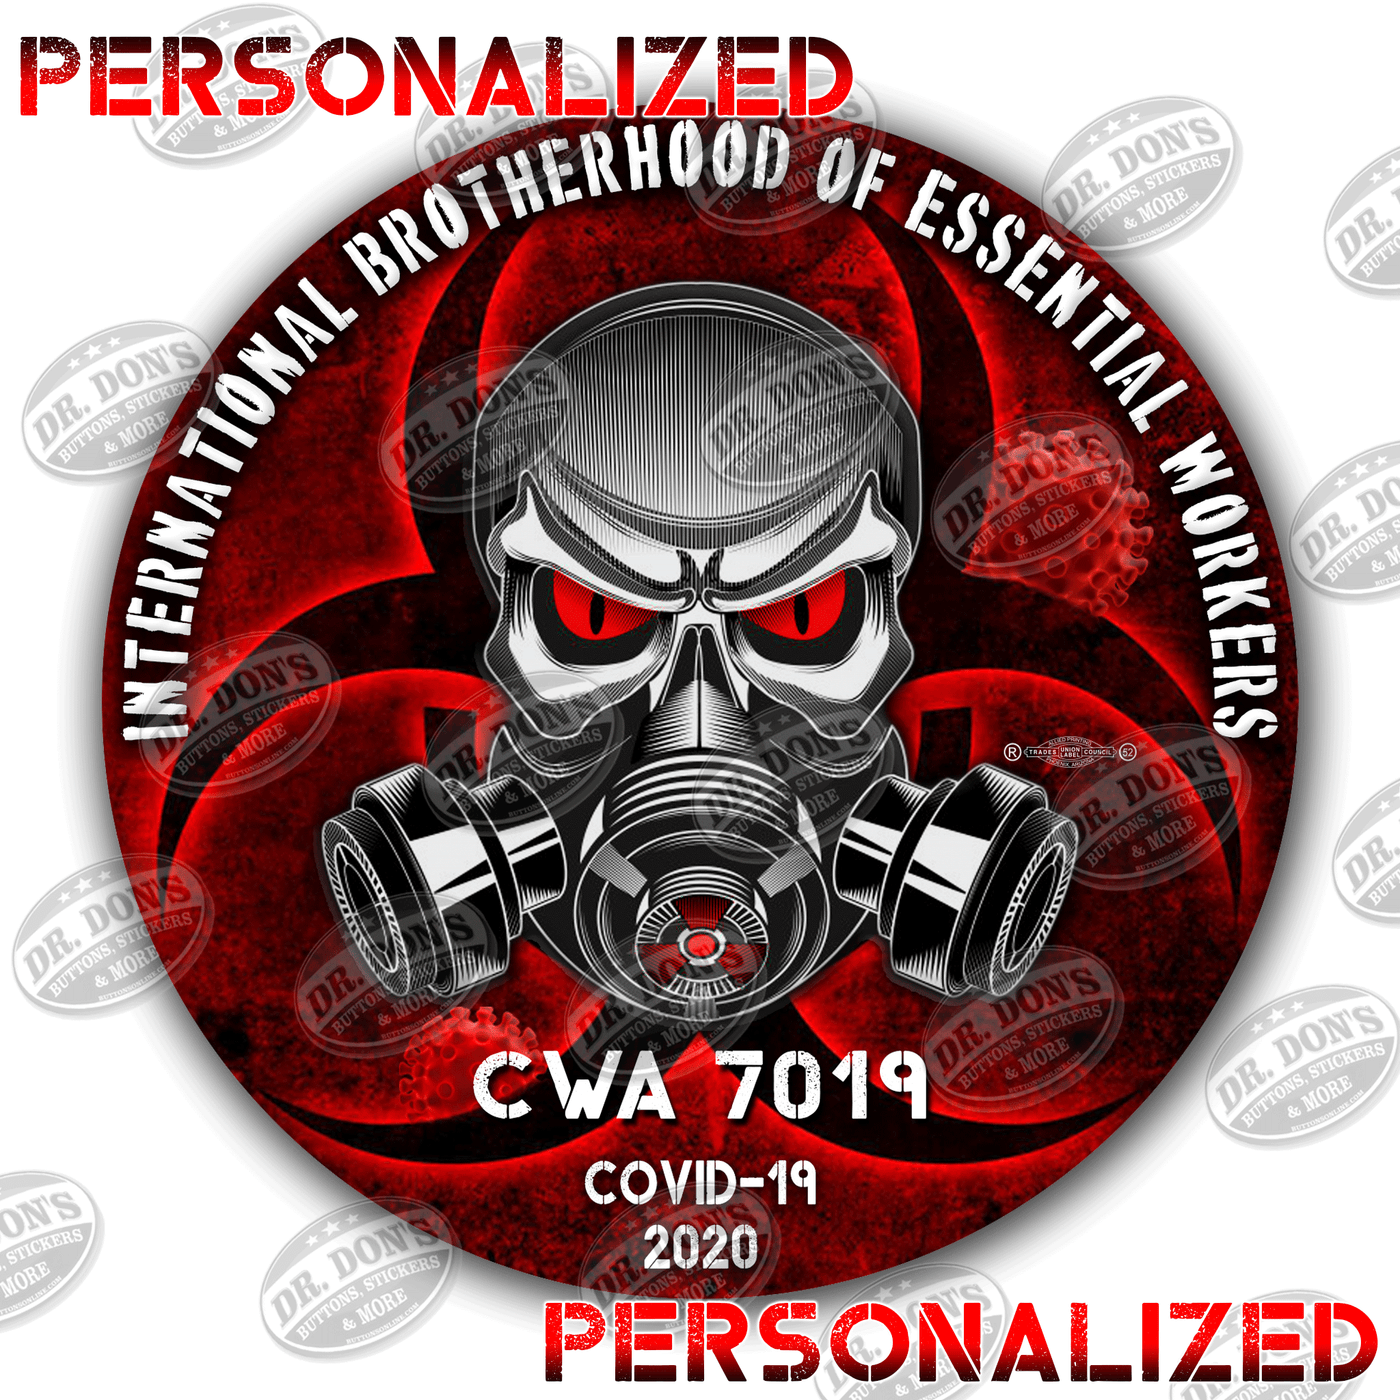 Personalized Brotherhood of essential workers vinyl stickers Red with skull and gas mask 